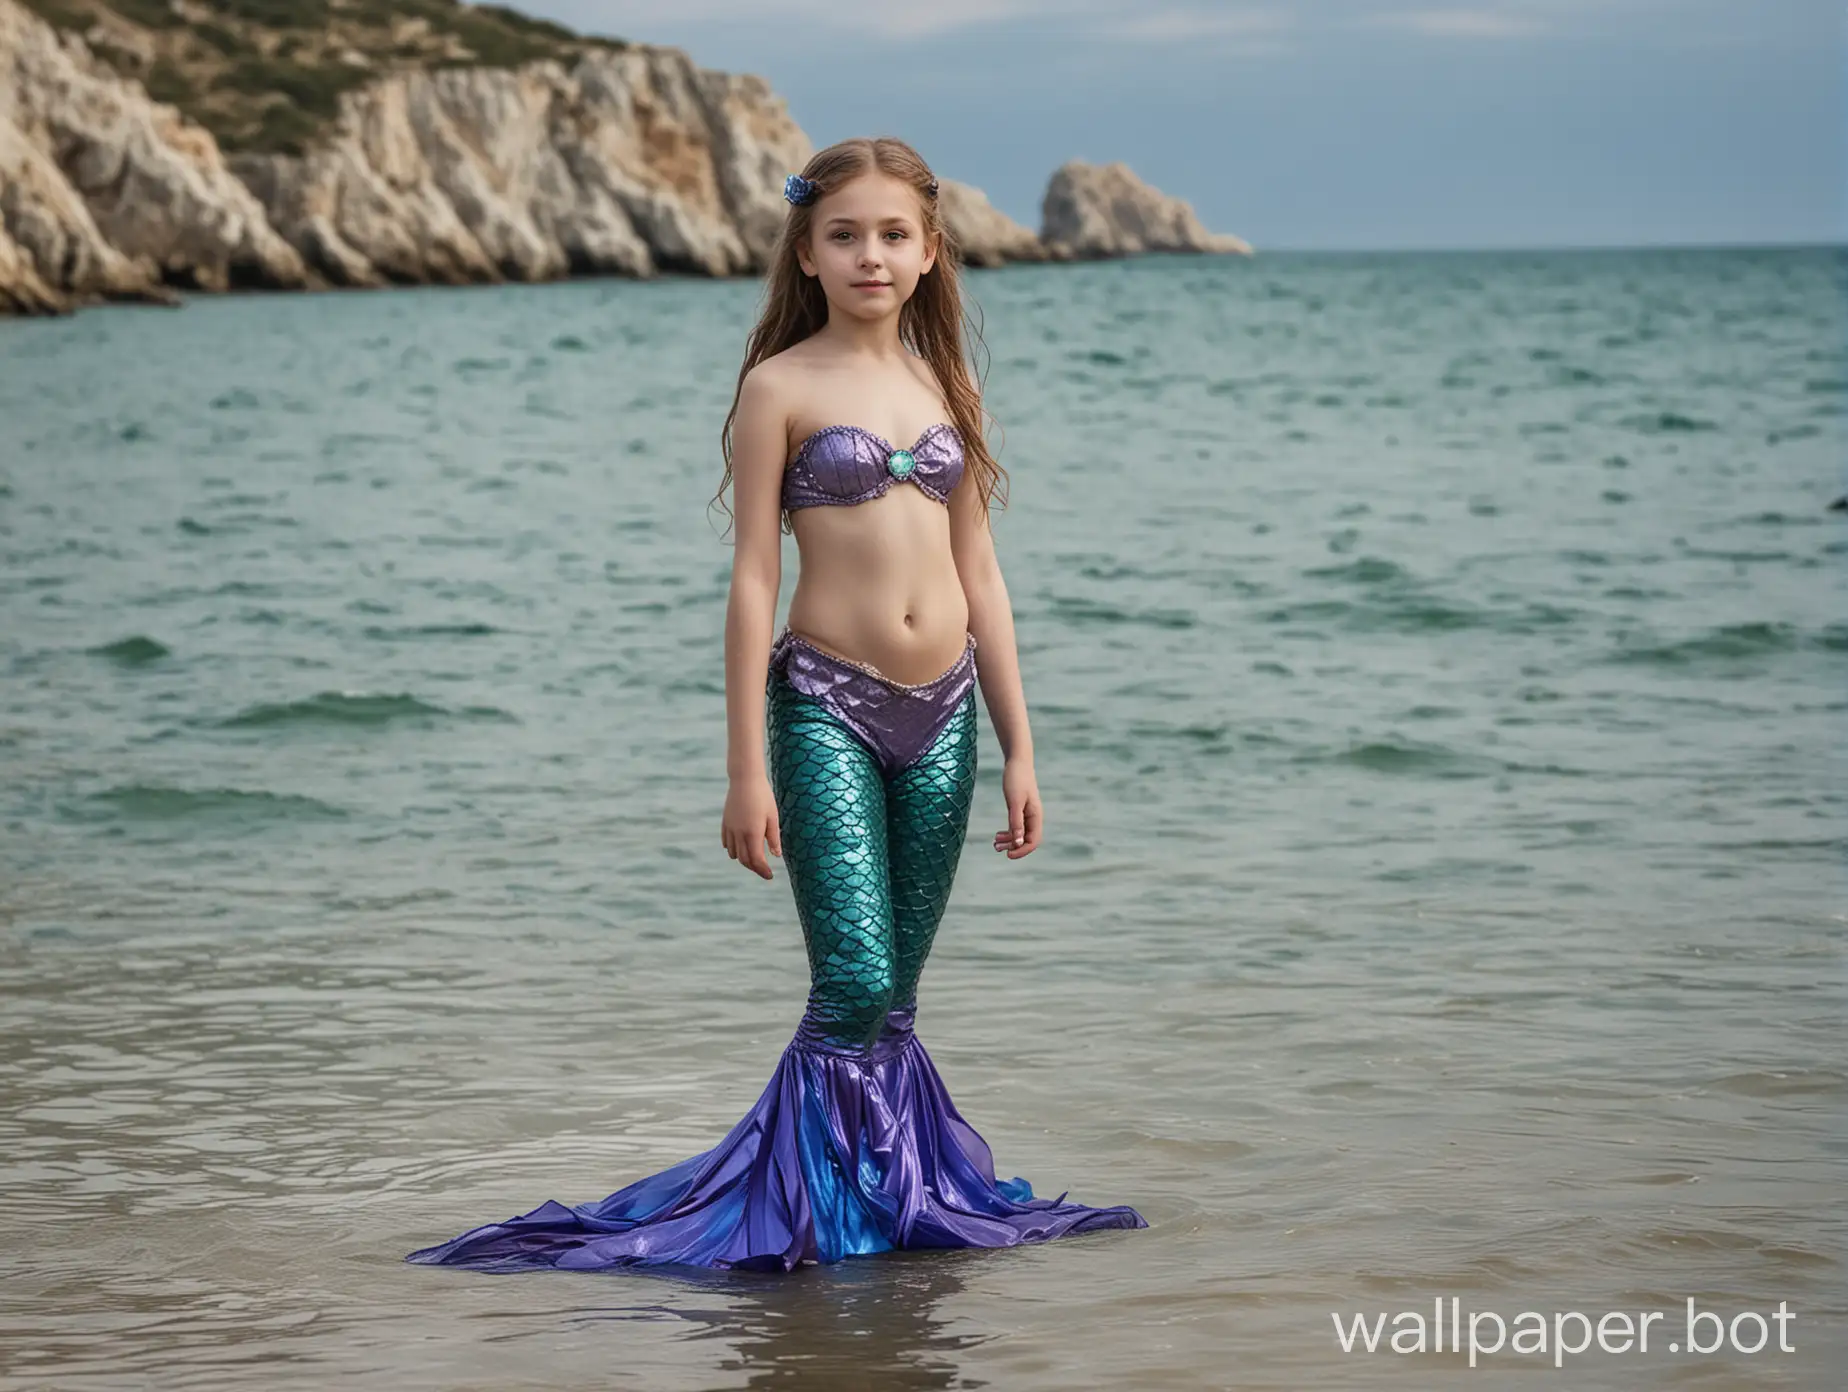 half-naked girl 10 years old in the image of a mermaid, full height, cosplay, Crimea, sea view